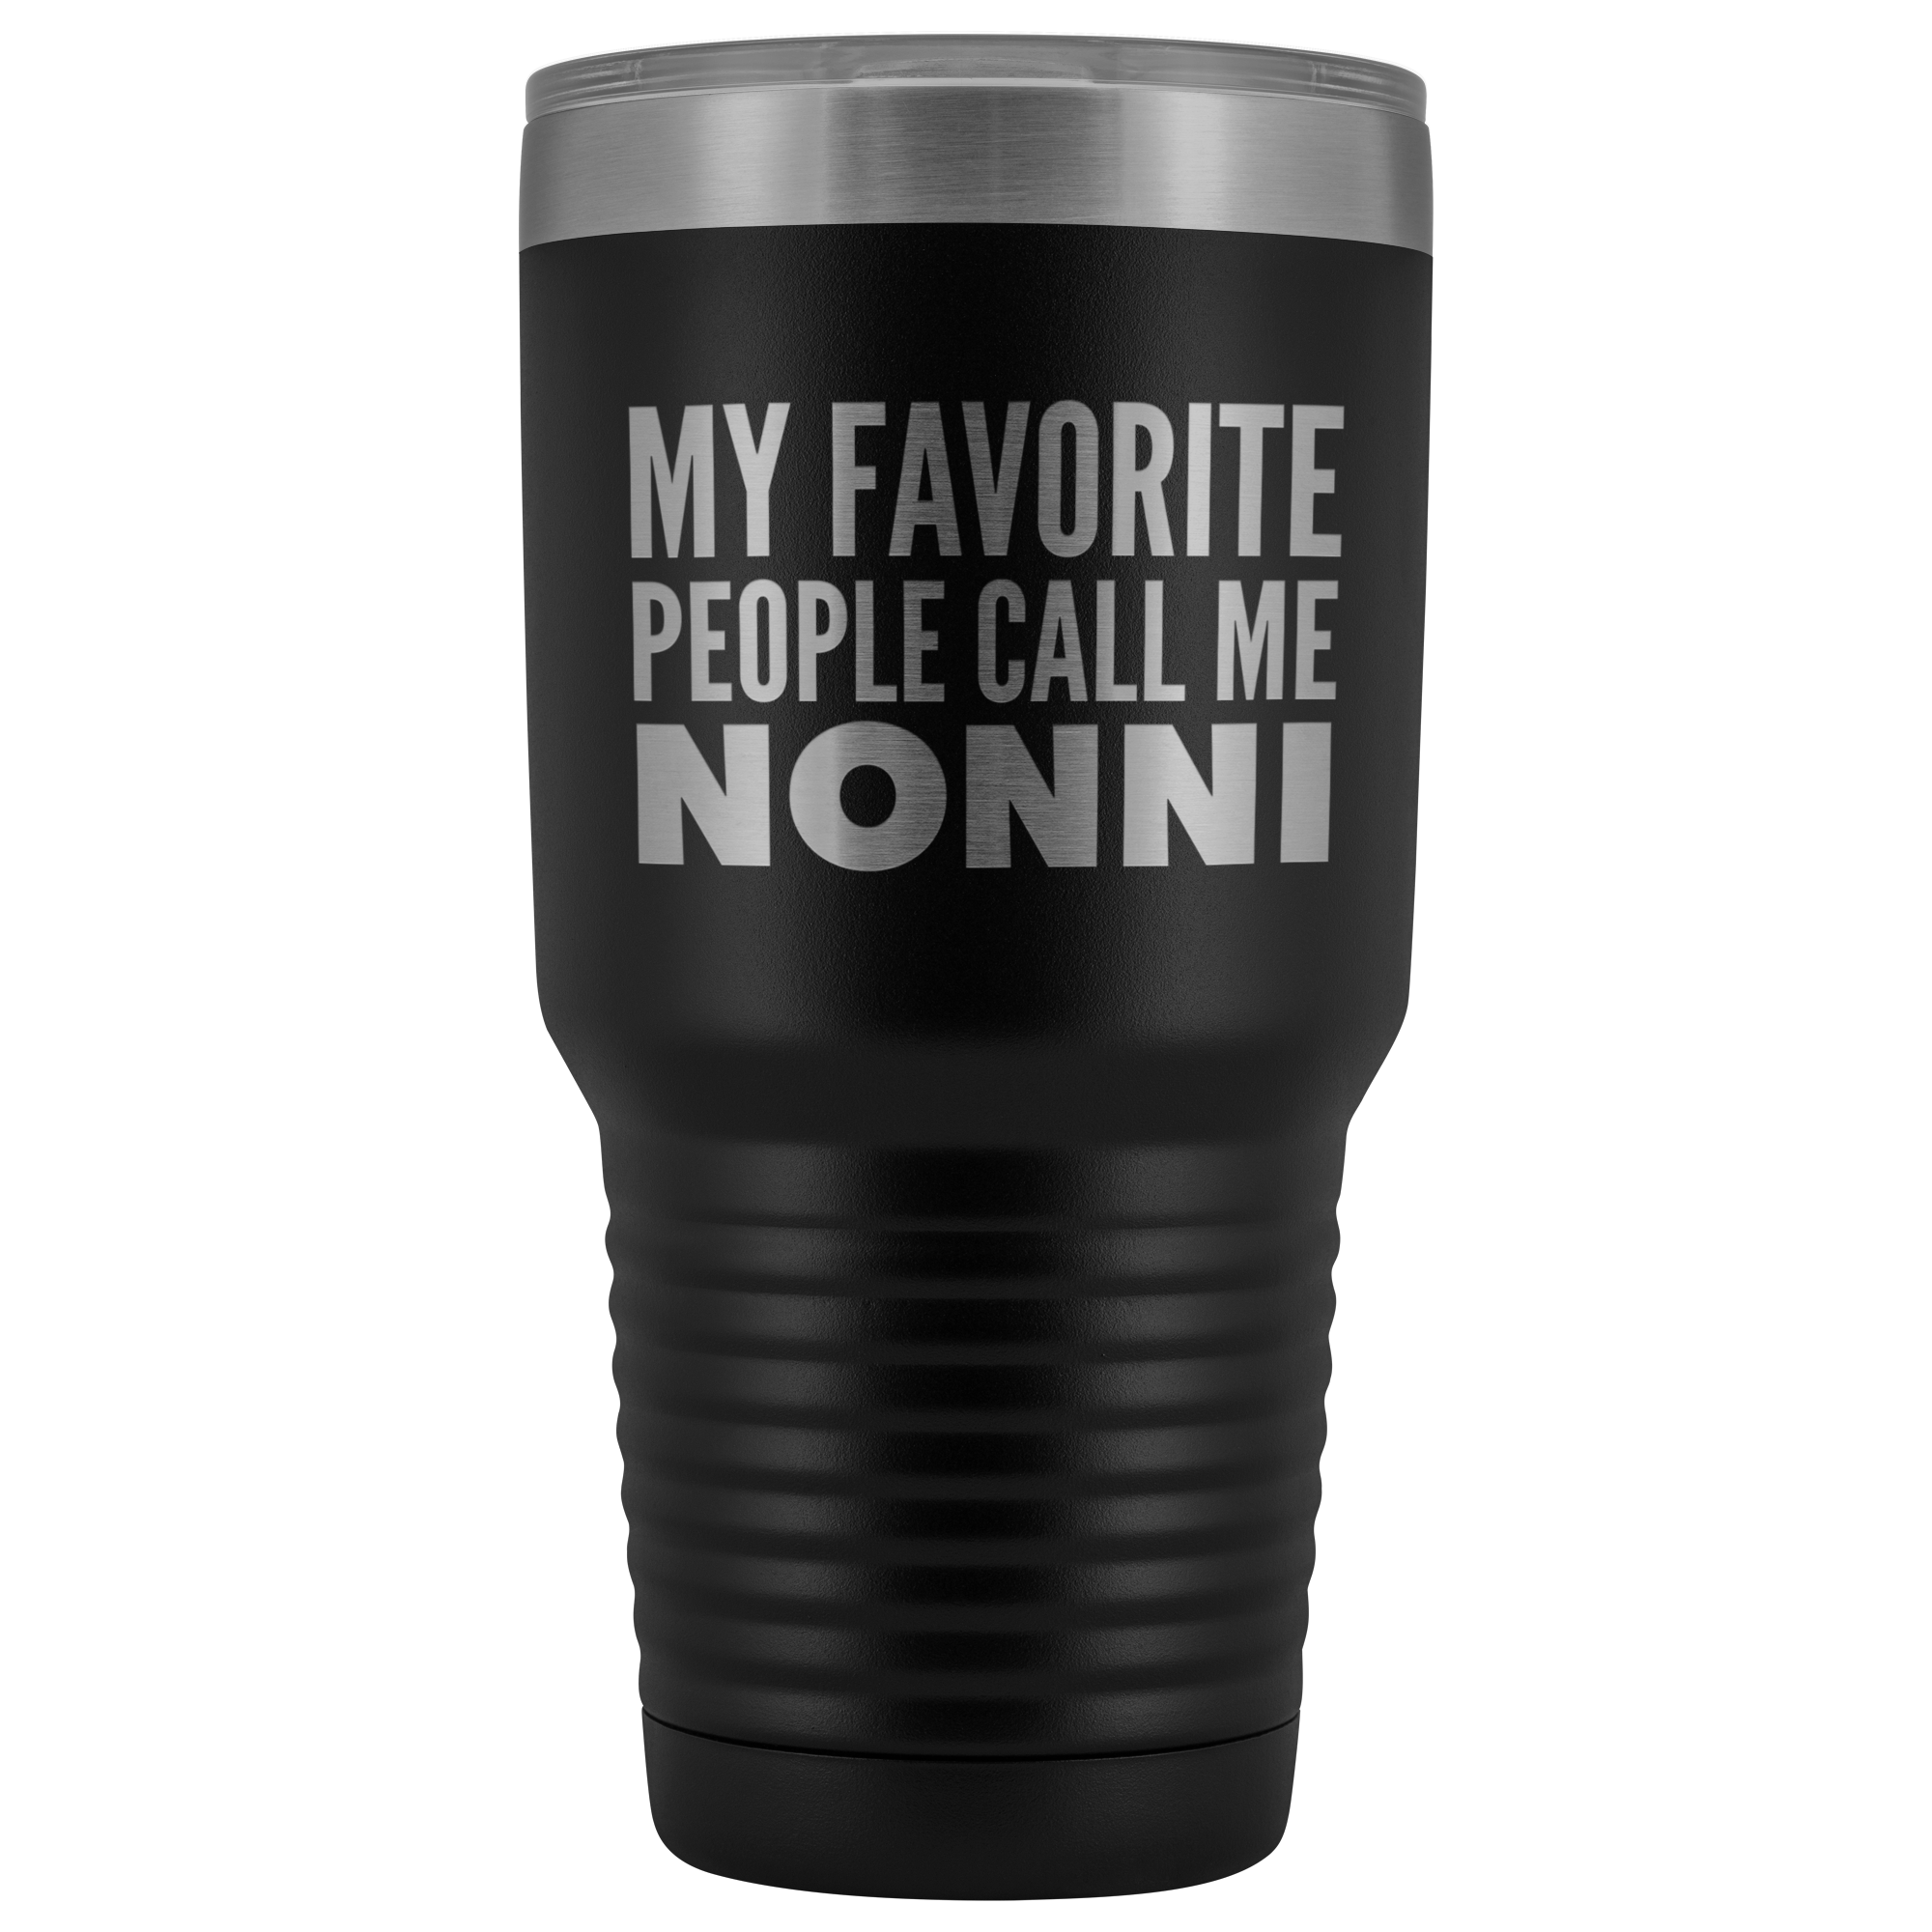 Nonnie Gifts My Favorite People Call Me Nonnie Tumbler Funny Metal Mug for Nonnies Double Wall Insulated Hot Cold Travel Cup 30oz BPA Free